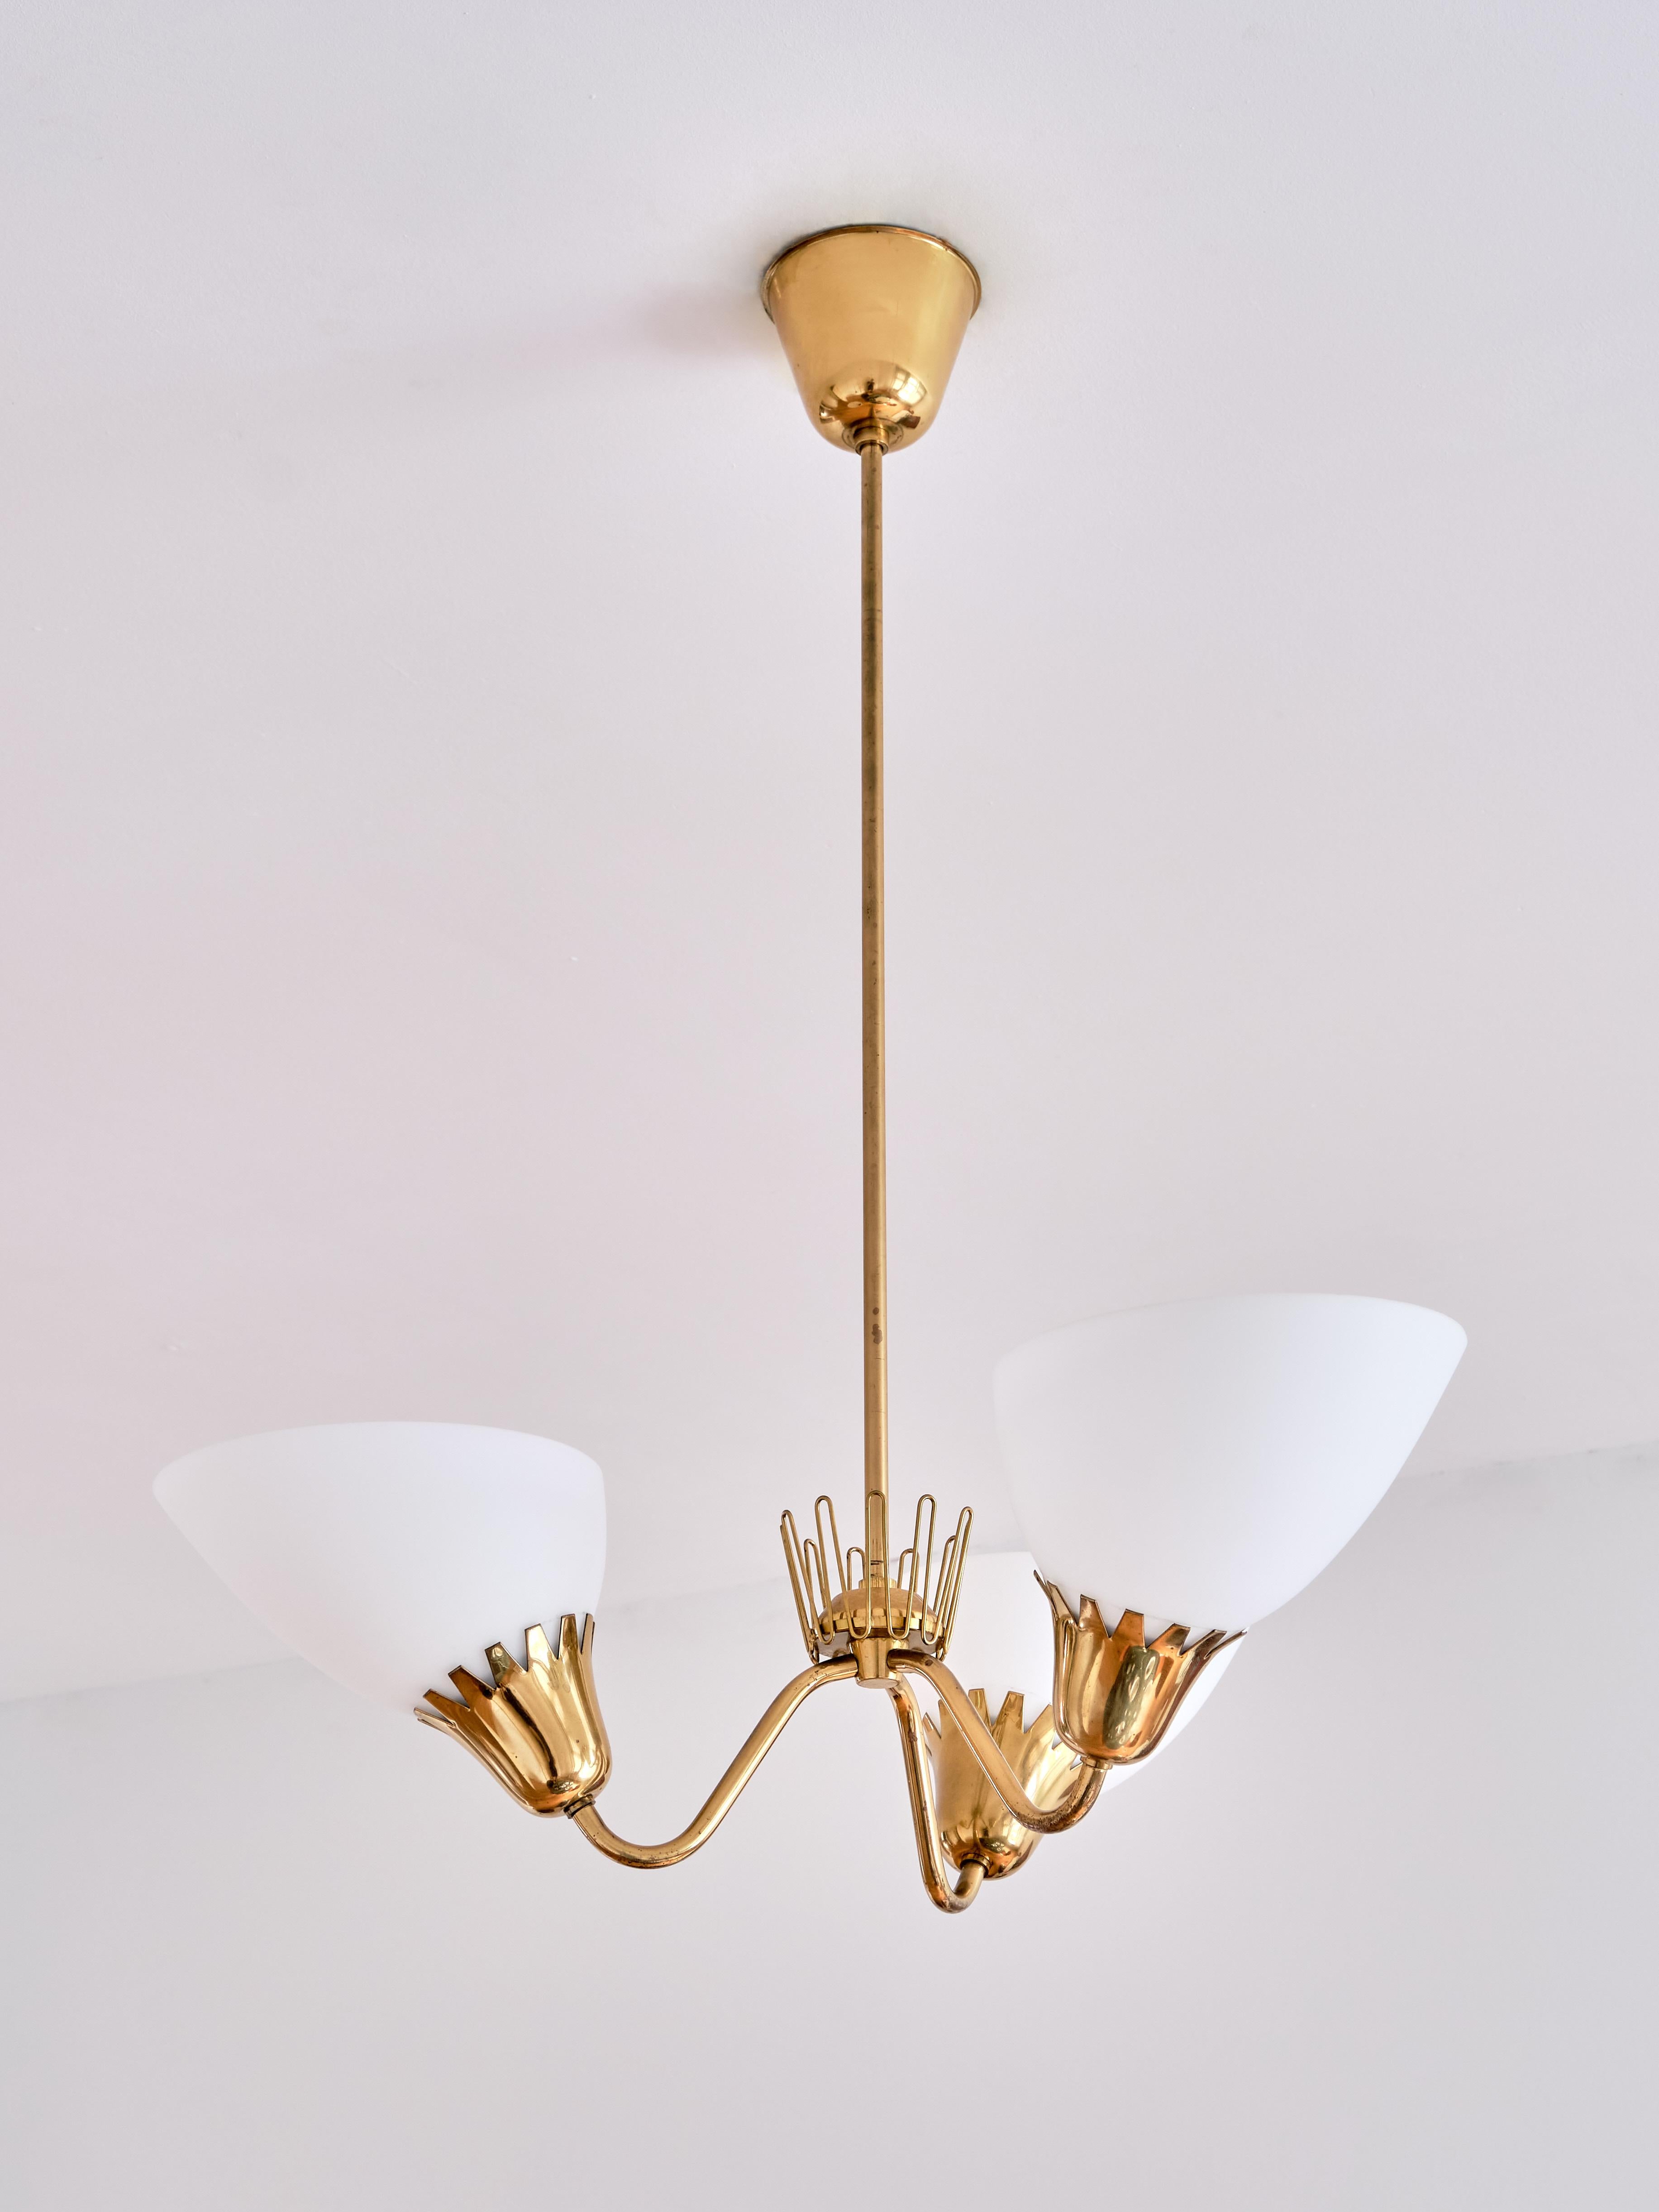 This rare three arm chandelier was produced by ASEA in Sweden in the early 1950s. Brass stem, three arms and fittings with matte opaline glass shades. The zigzag edges of the fittings and the decorative brass crown detail in the middle are